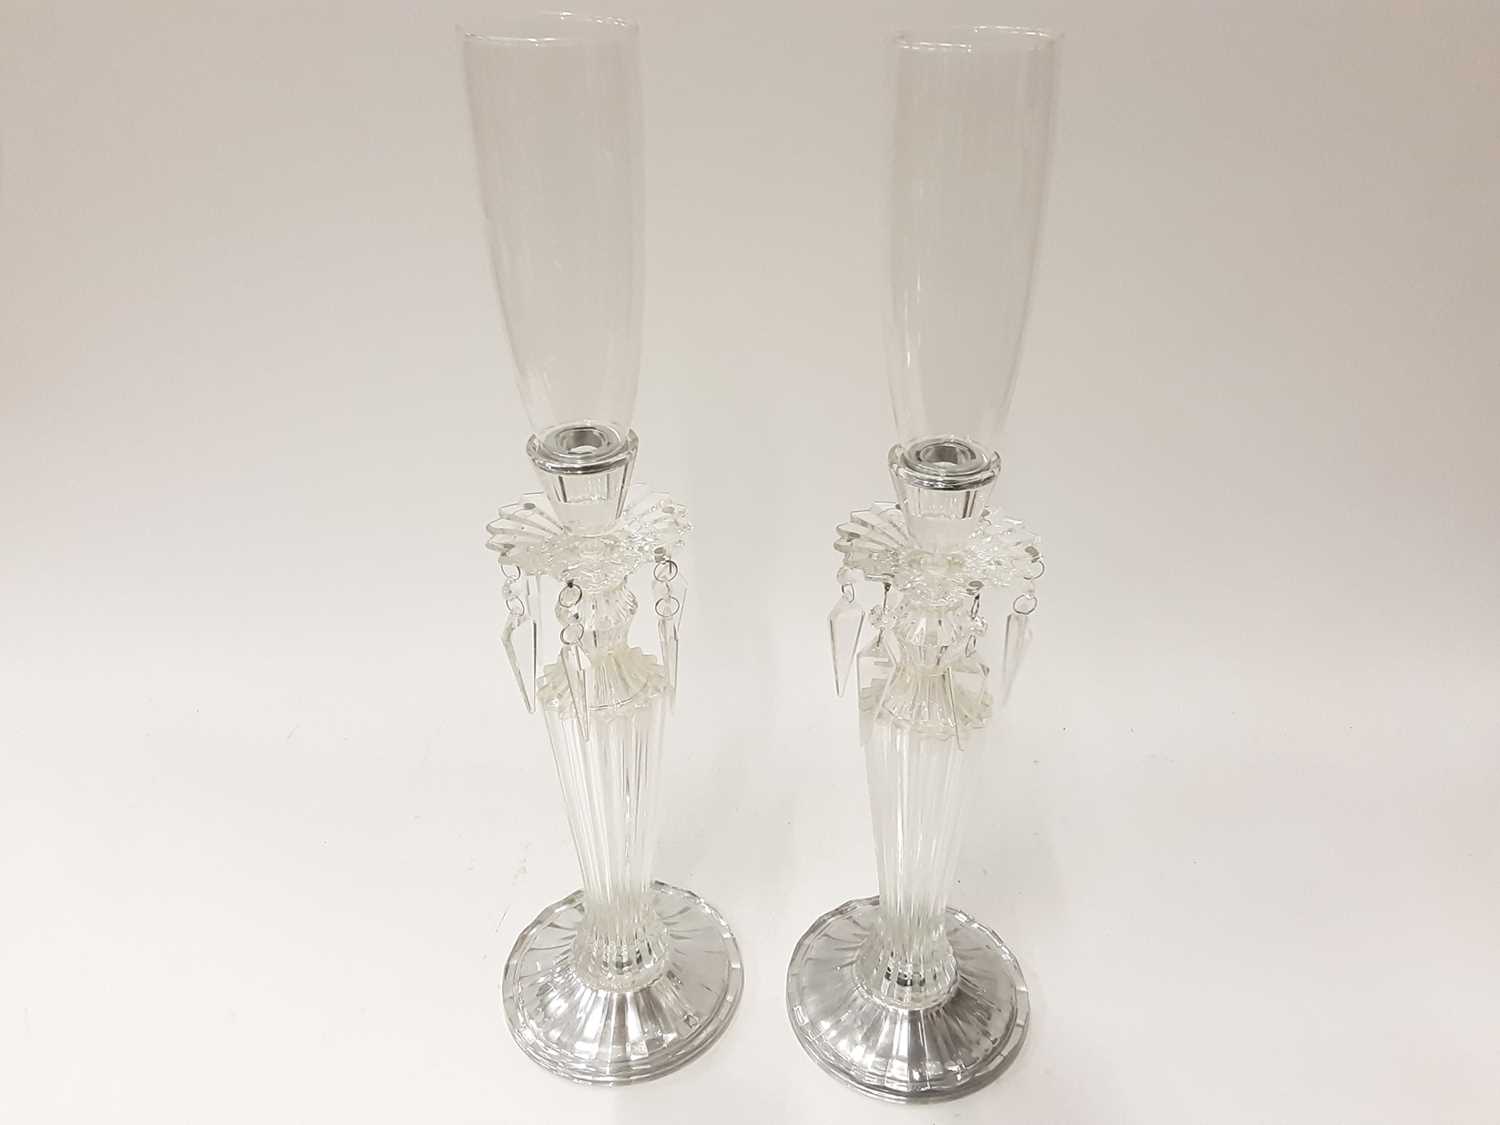 Lot 1314 - Pair of contemporary glass candlesticks with prismatic drops by Julien Macdonald